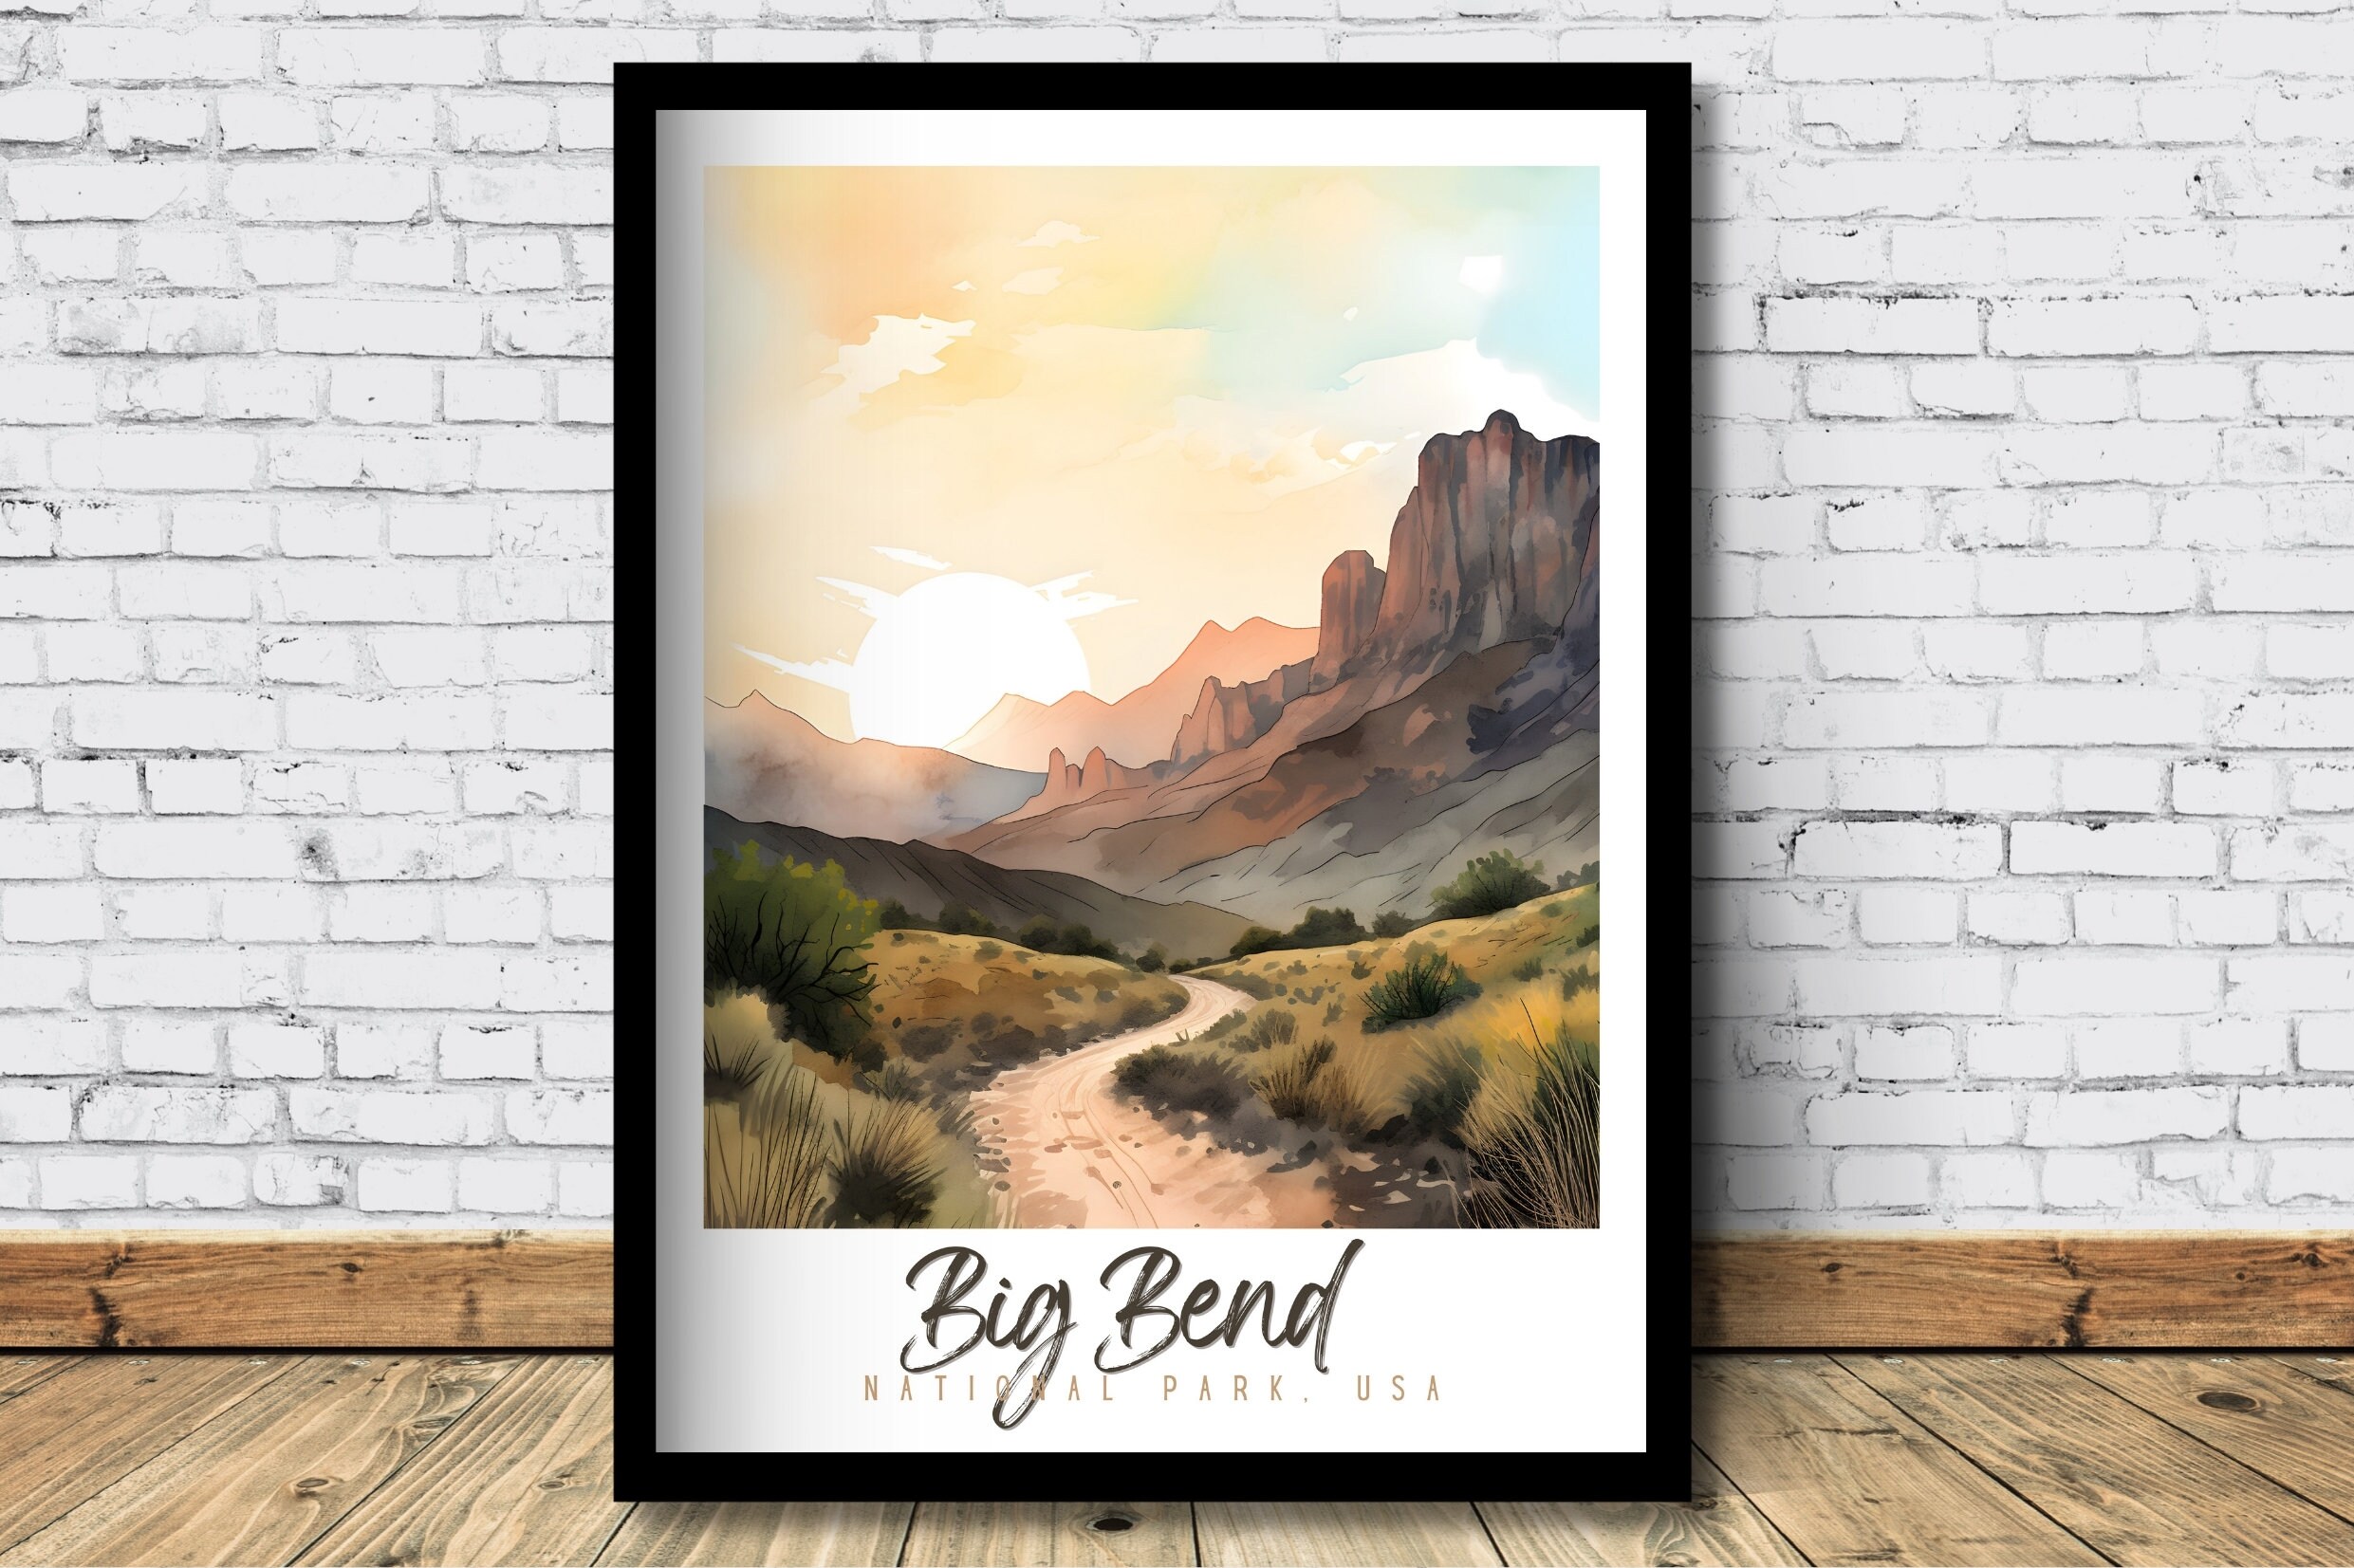 Big Bend DIY Watercolor Kit Big Bend Art Date Night Paint Night Texas Learn  to Paint Adult Art Kit Christmas Gift for Creatives 